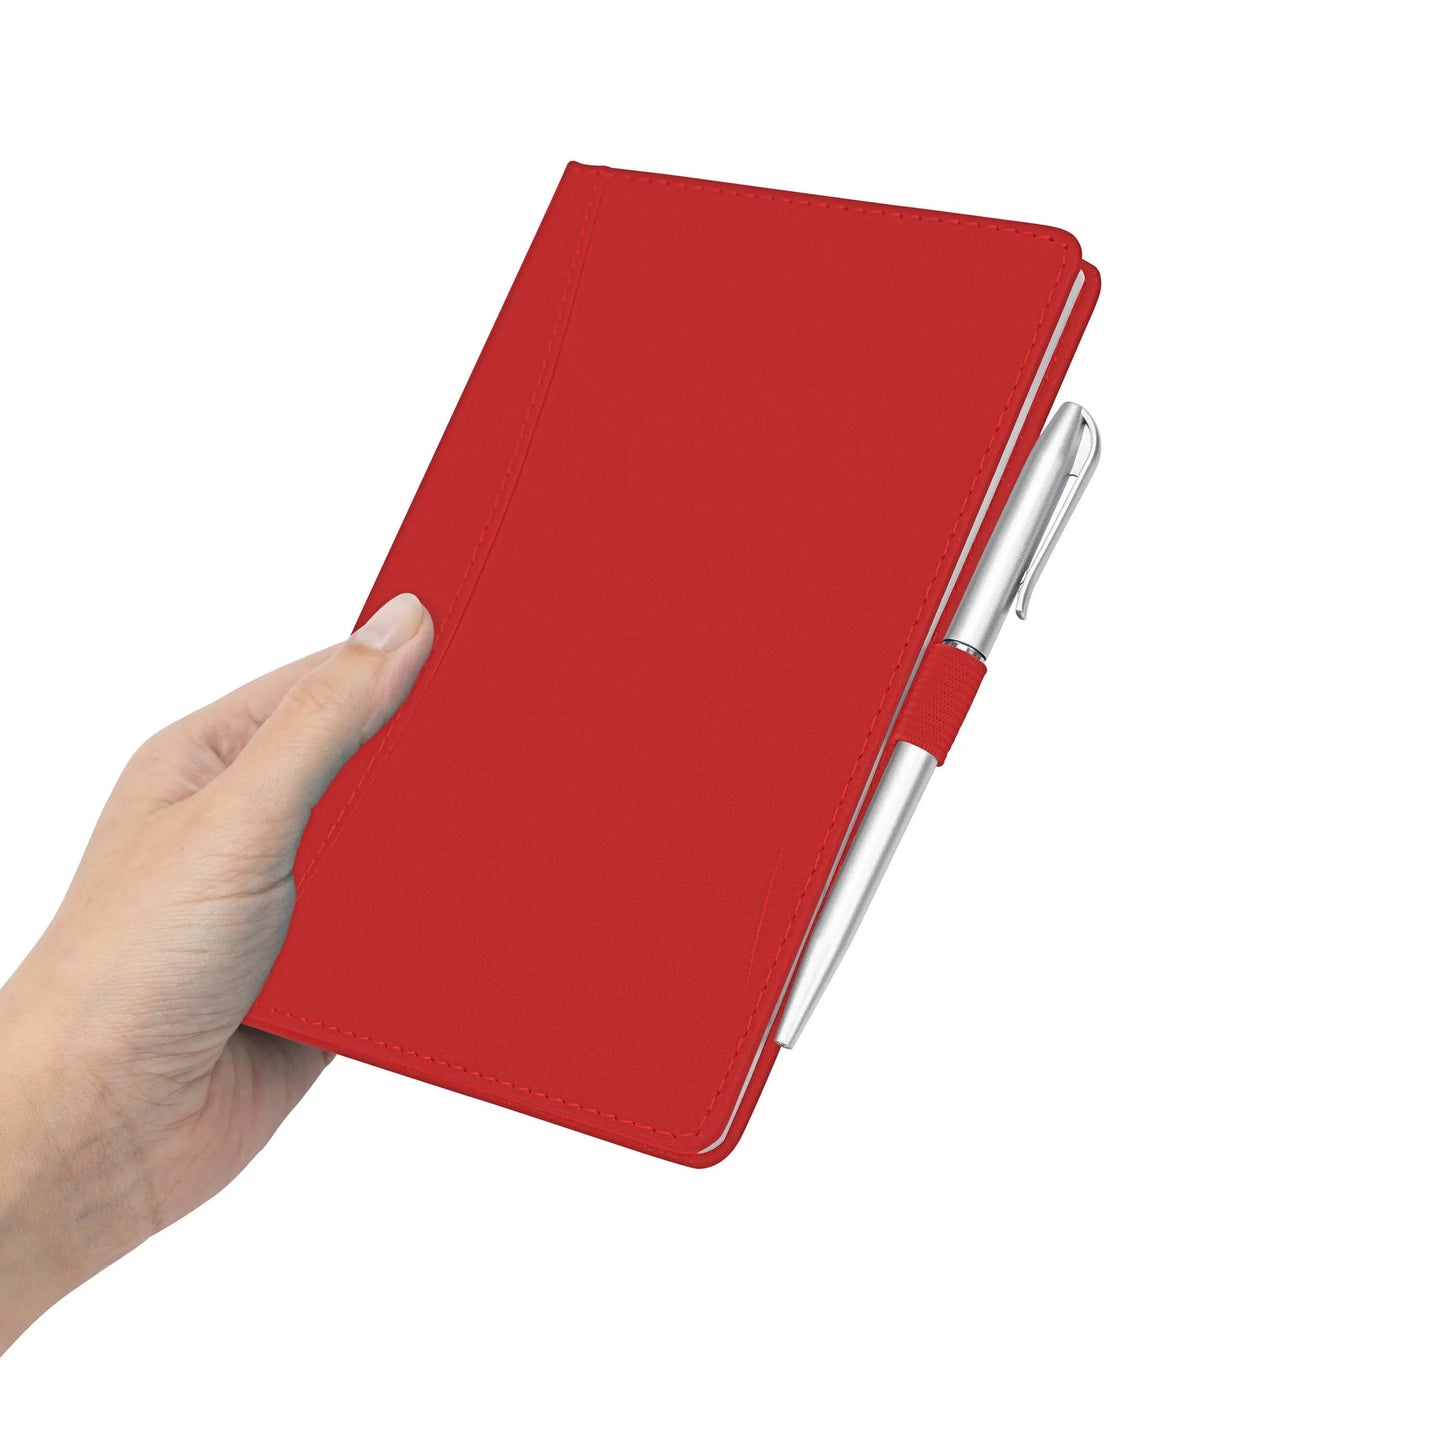 Ultimate Password & Username Organiser A-Z Index Tabbed Sections Red Hardcover Pen Included  Simplify and Secure Your Digital Life Keechi & co.